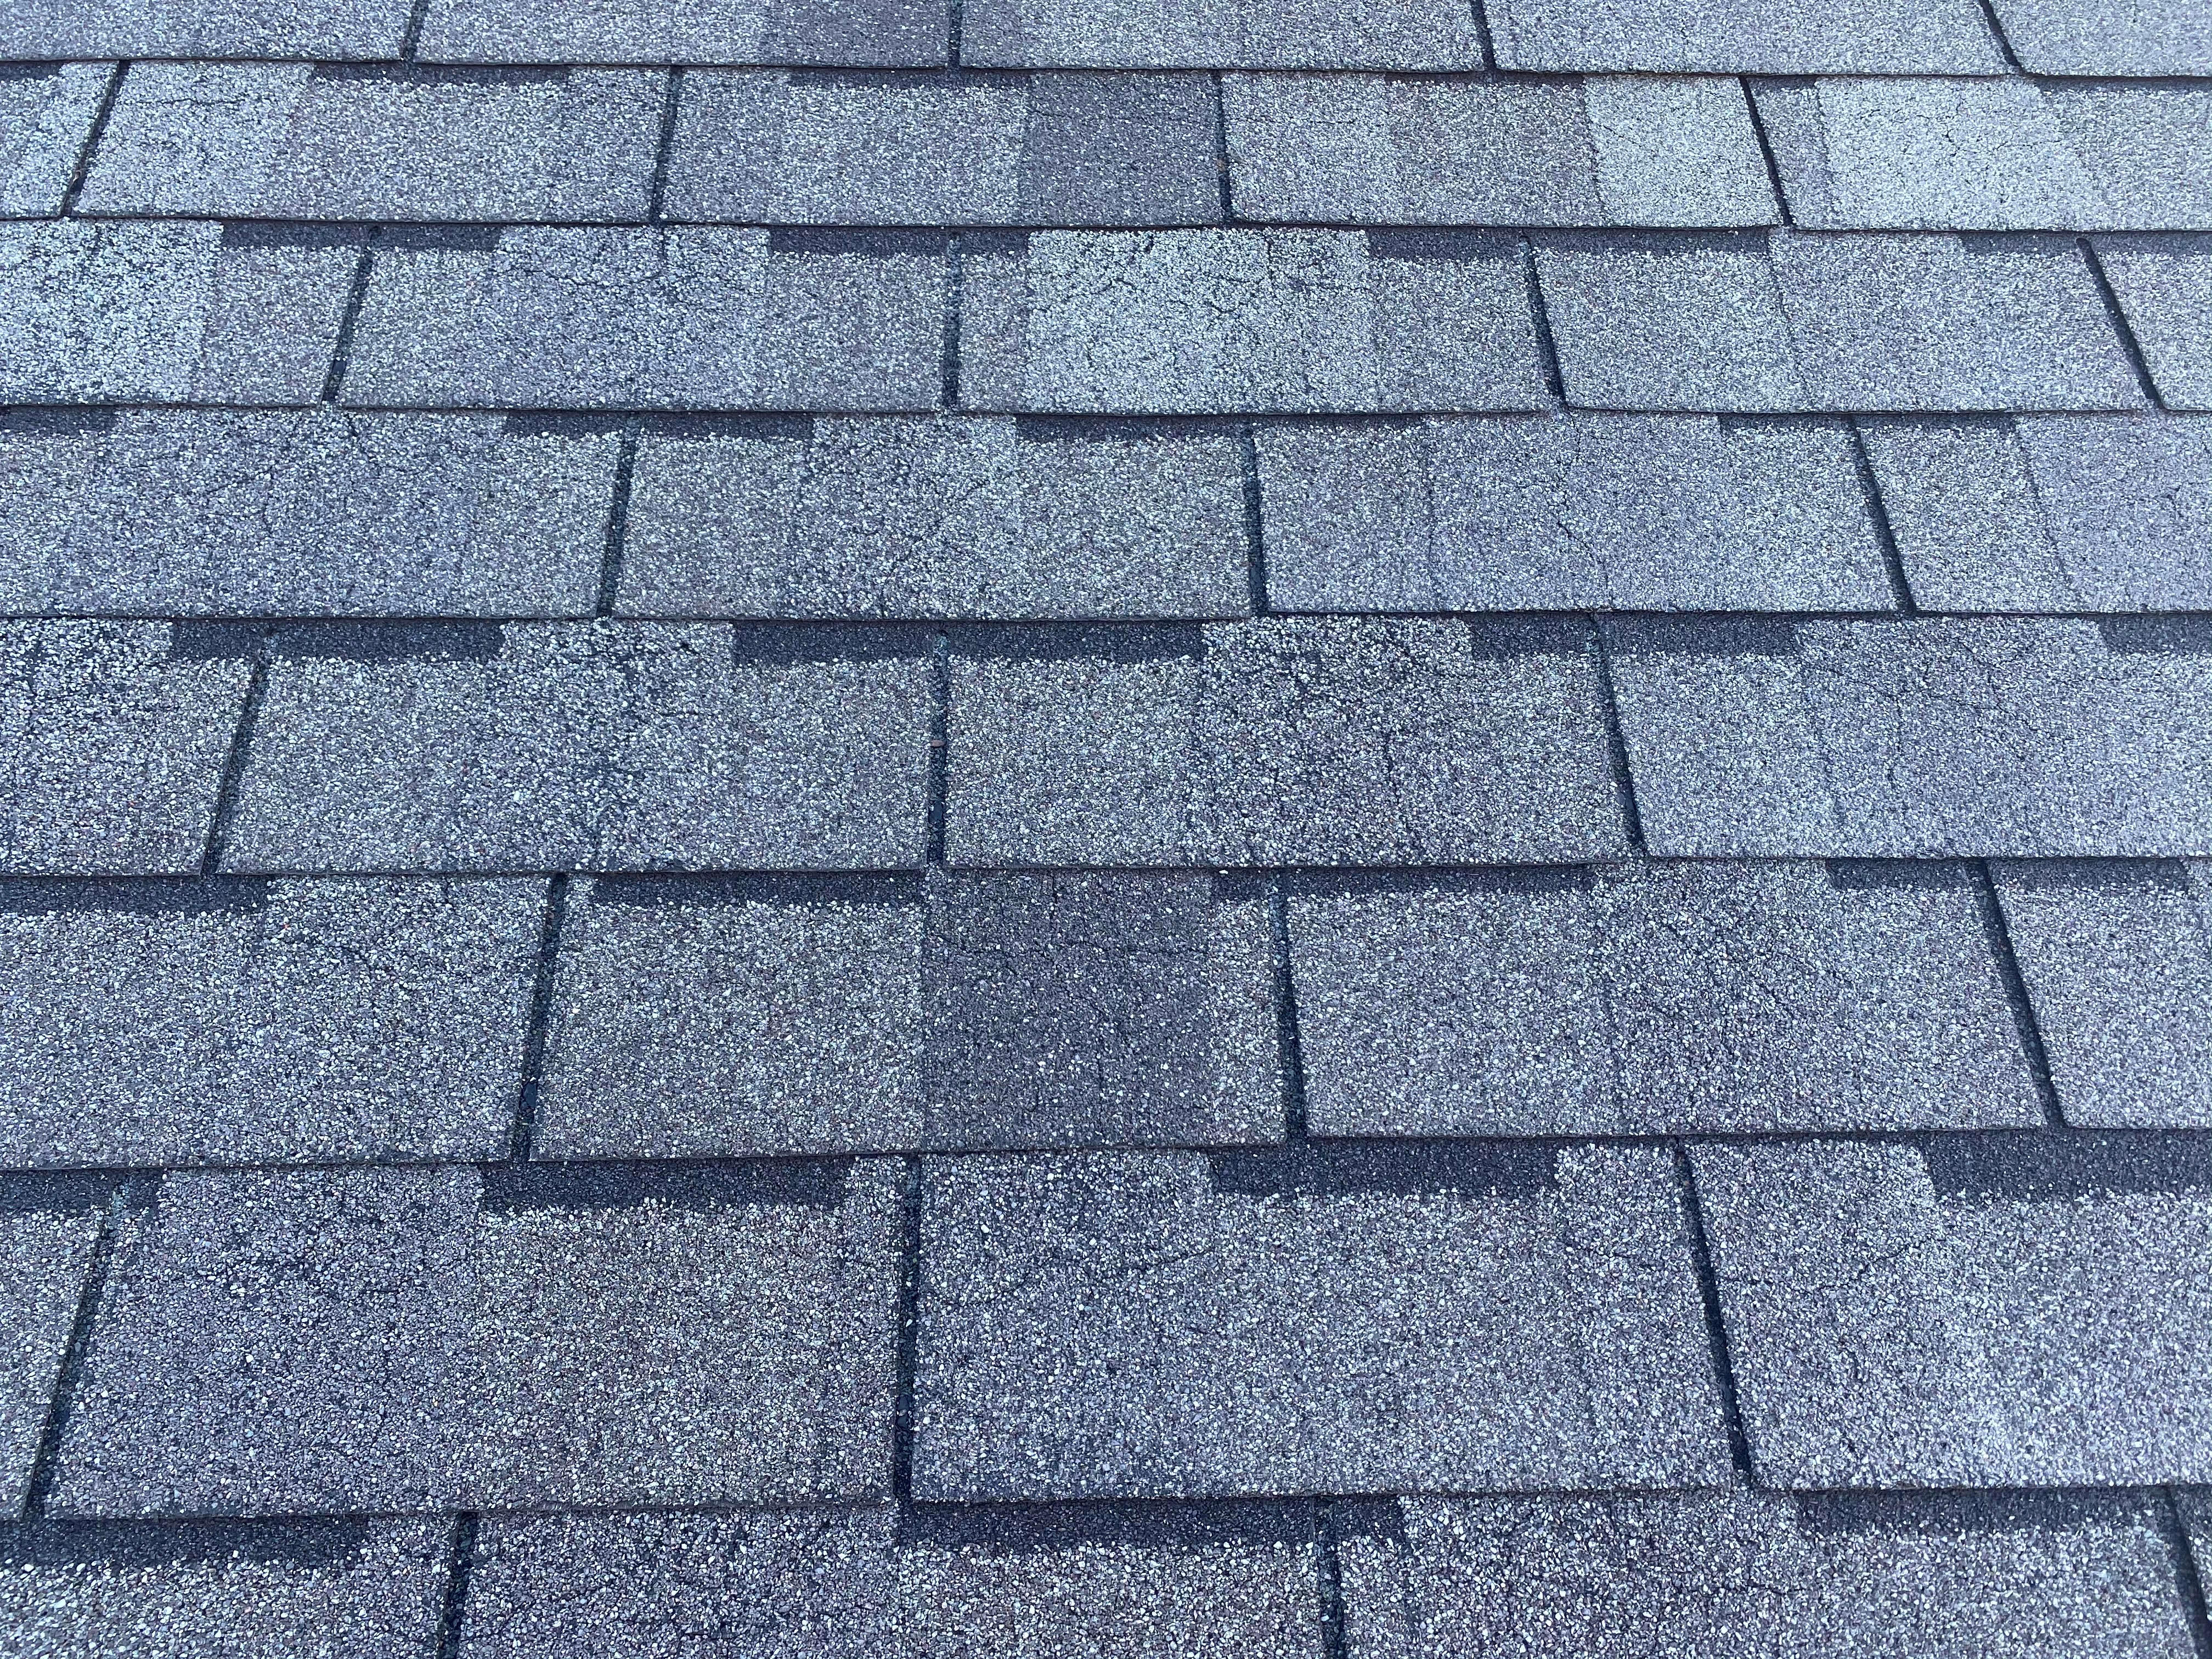 Watch out for this shingles. They were discontinued for a reason. If you believe your house has them and would like an idea of their condition , we'd be happy to take a look.